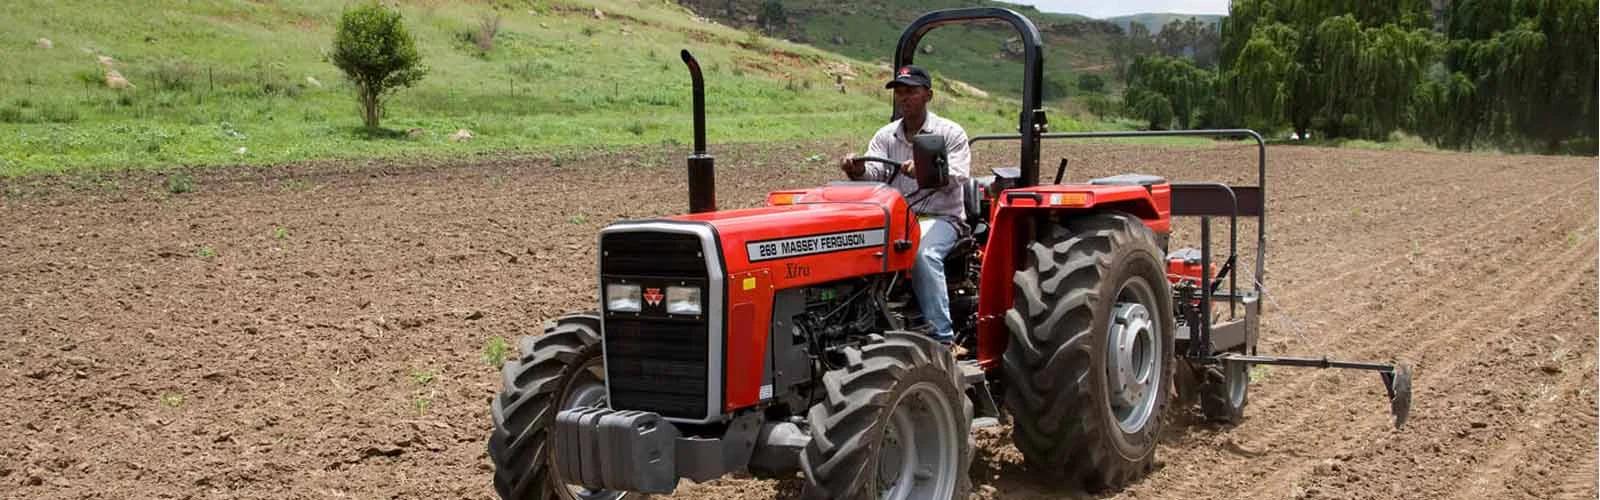 A Beginners Guide to Operating a Tractor in Guyana